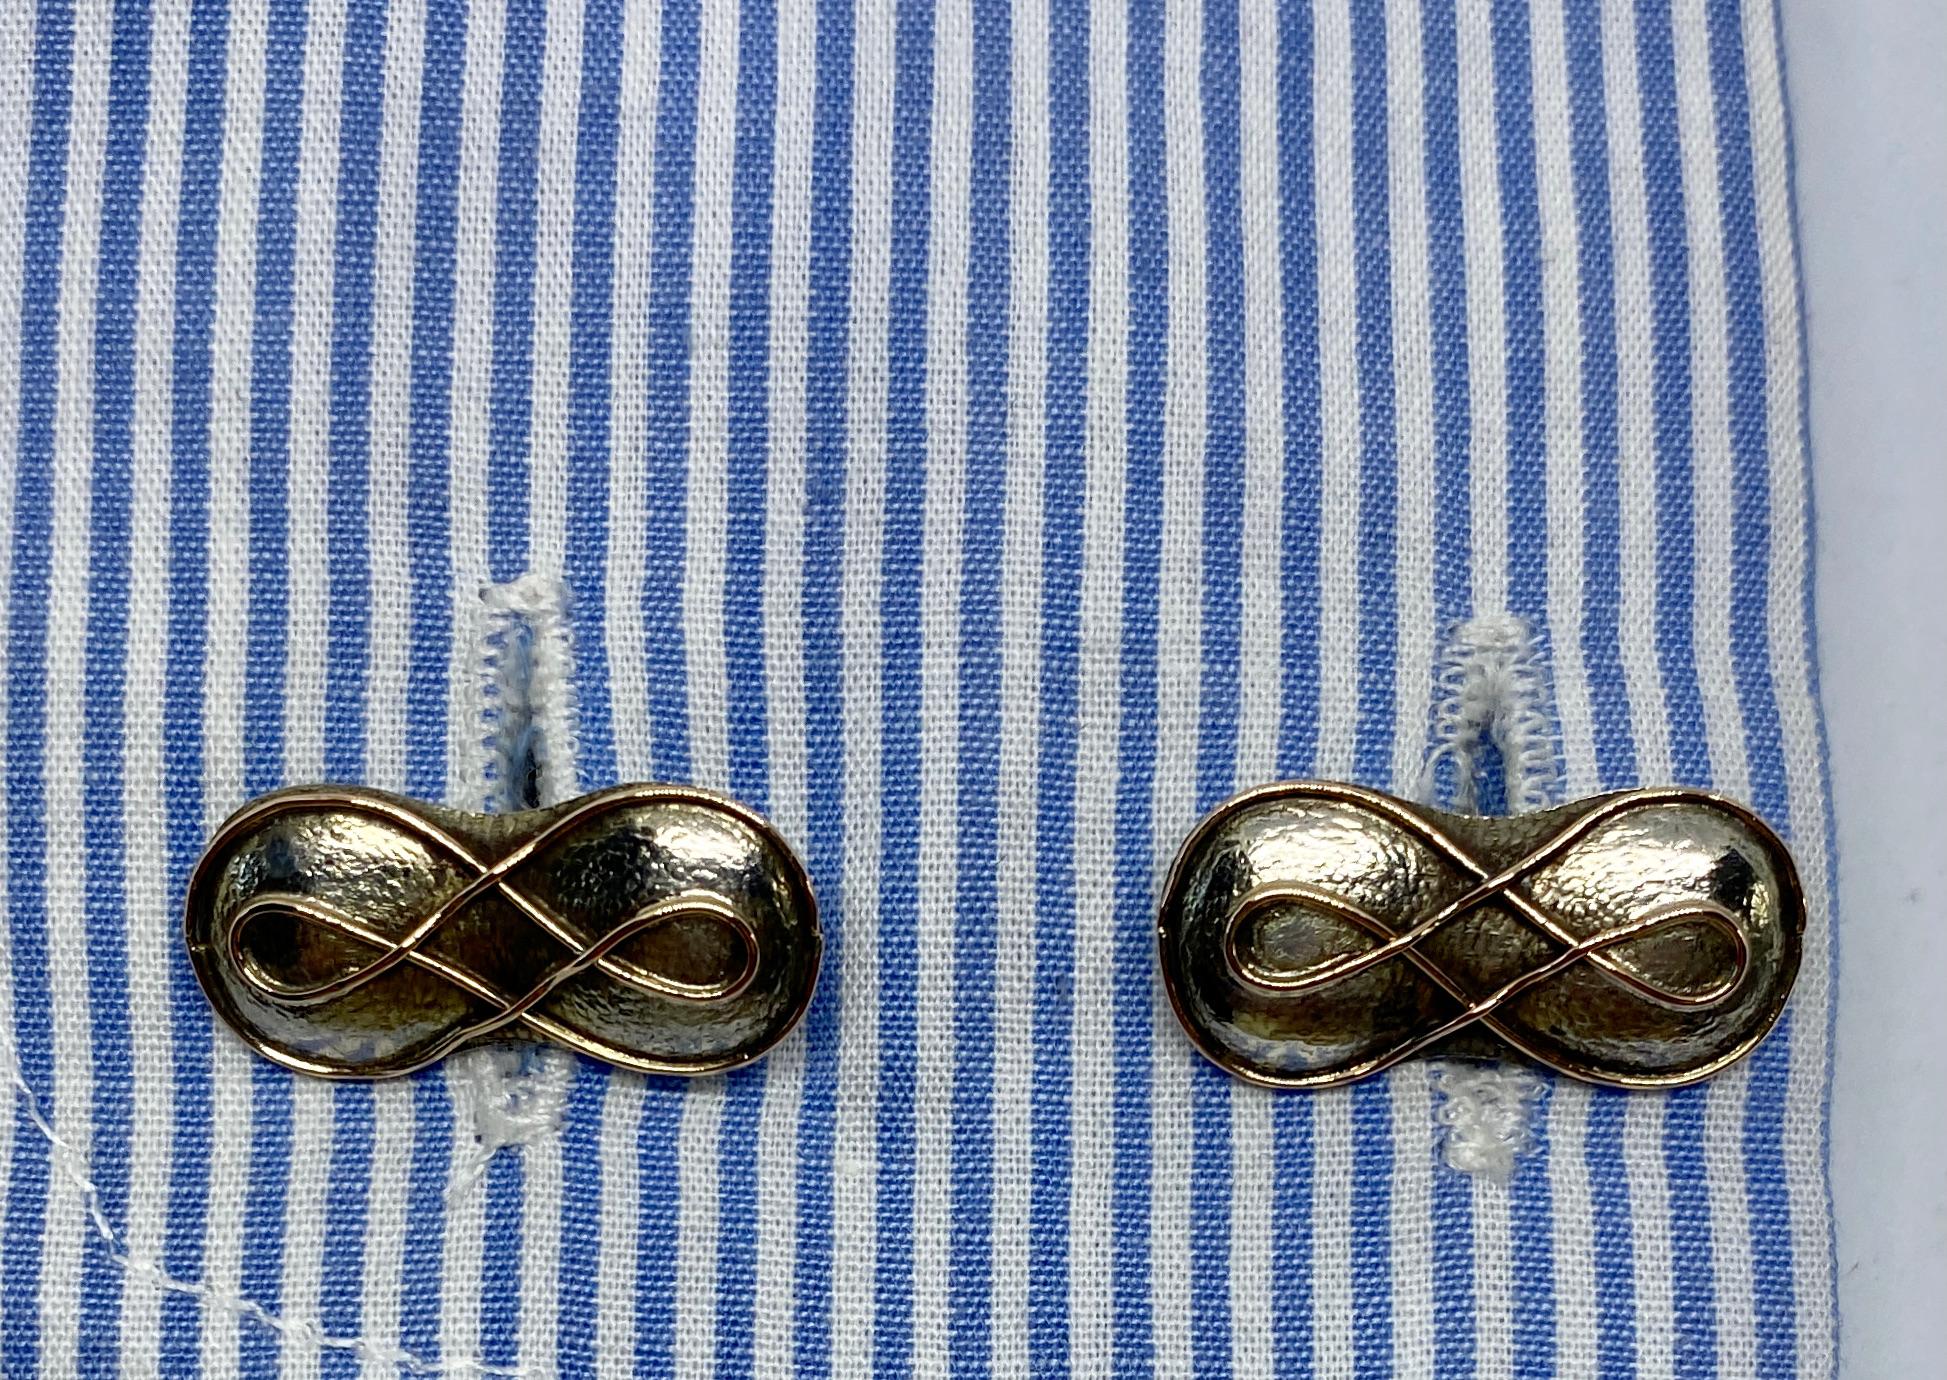 Antique Arts & Crafts Cufflinks in Sterling and Yellow Gold by George Shiebler 4